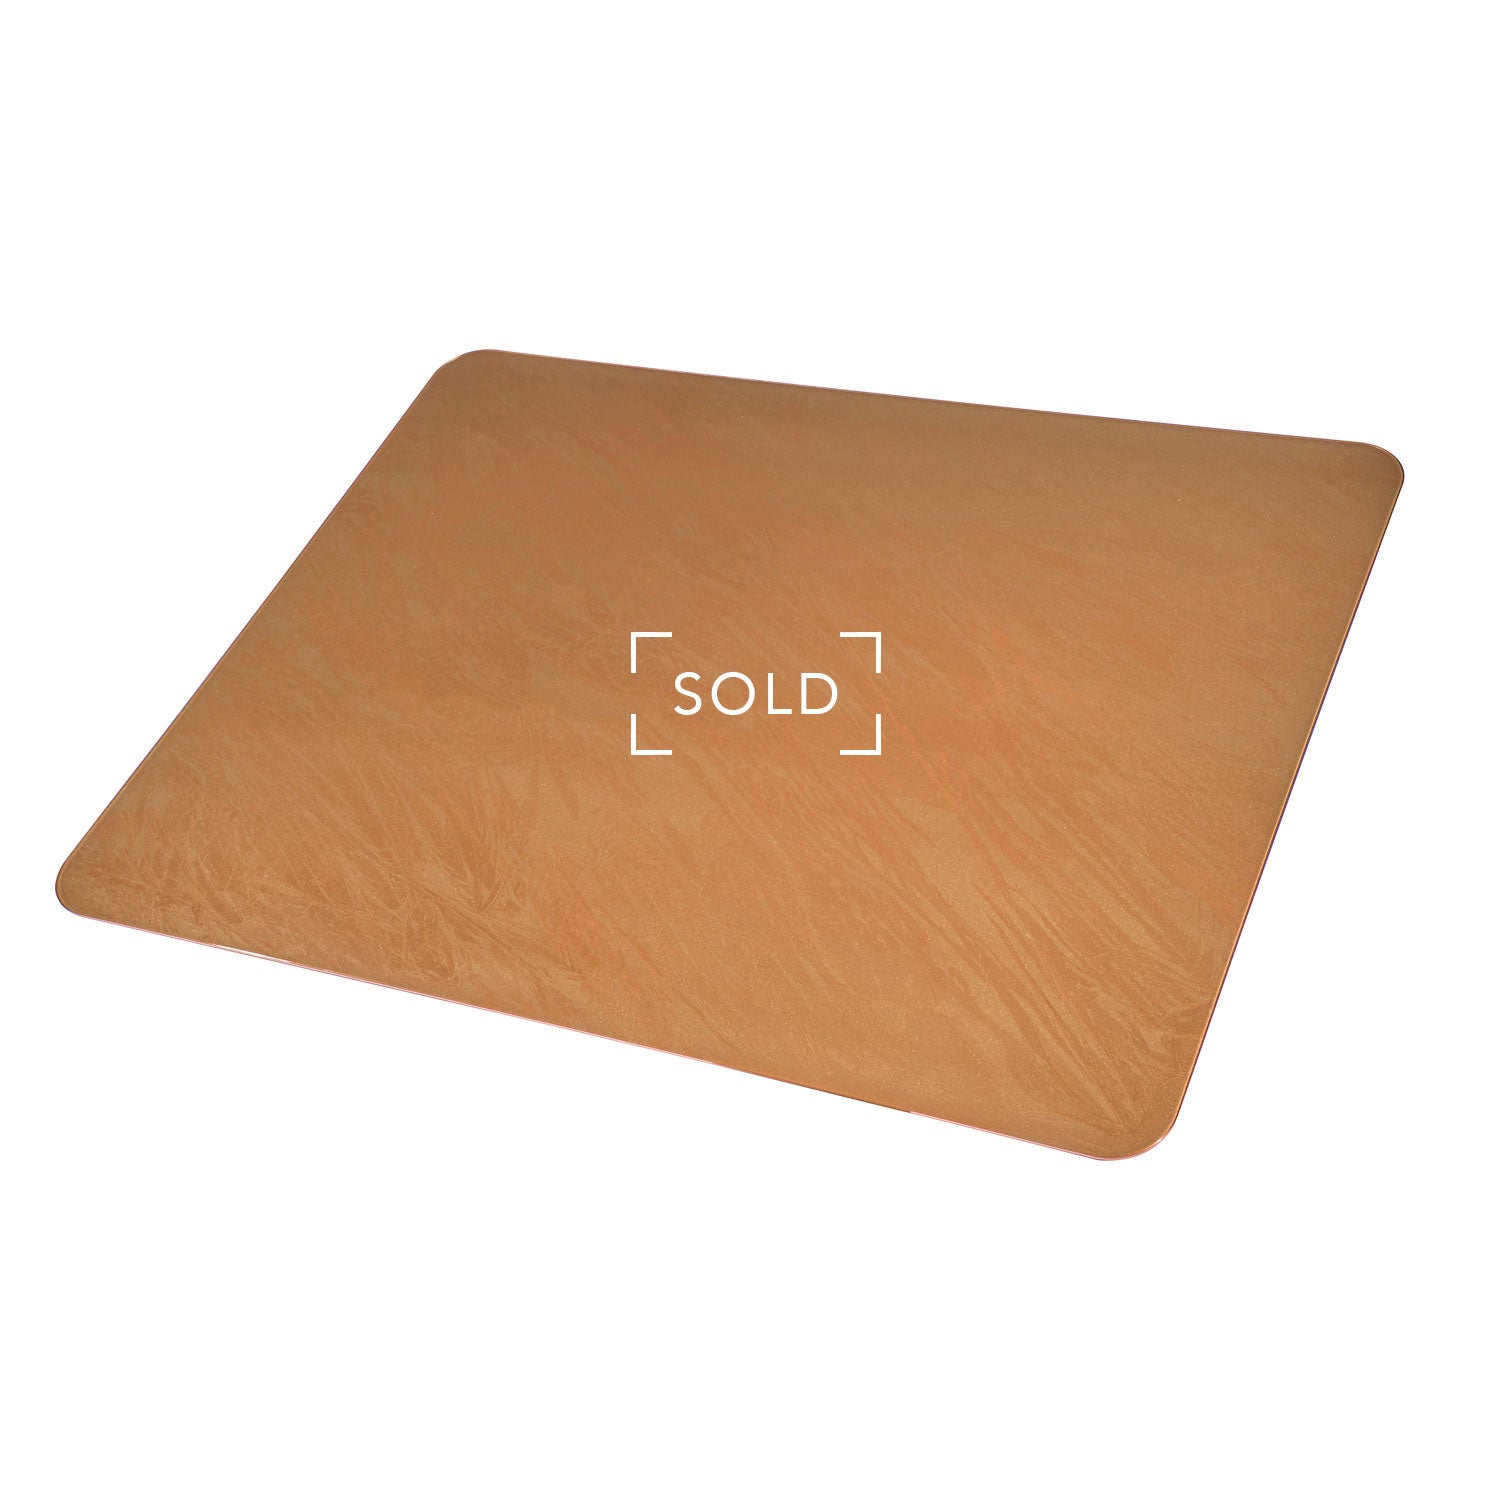 Bitcoined Brilliance Chair Mats 42inx48in